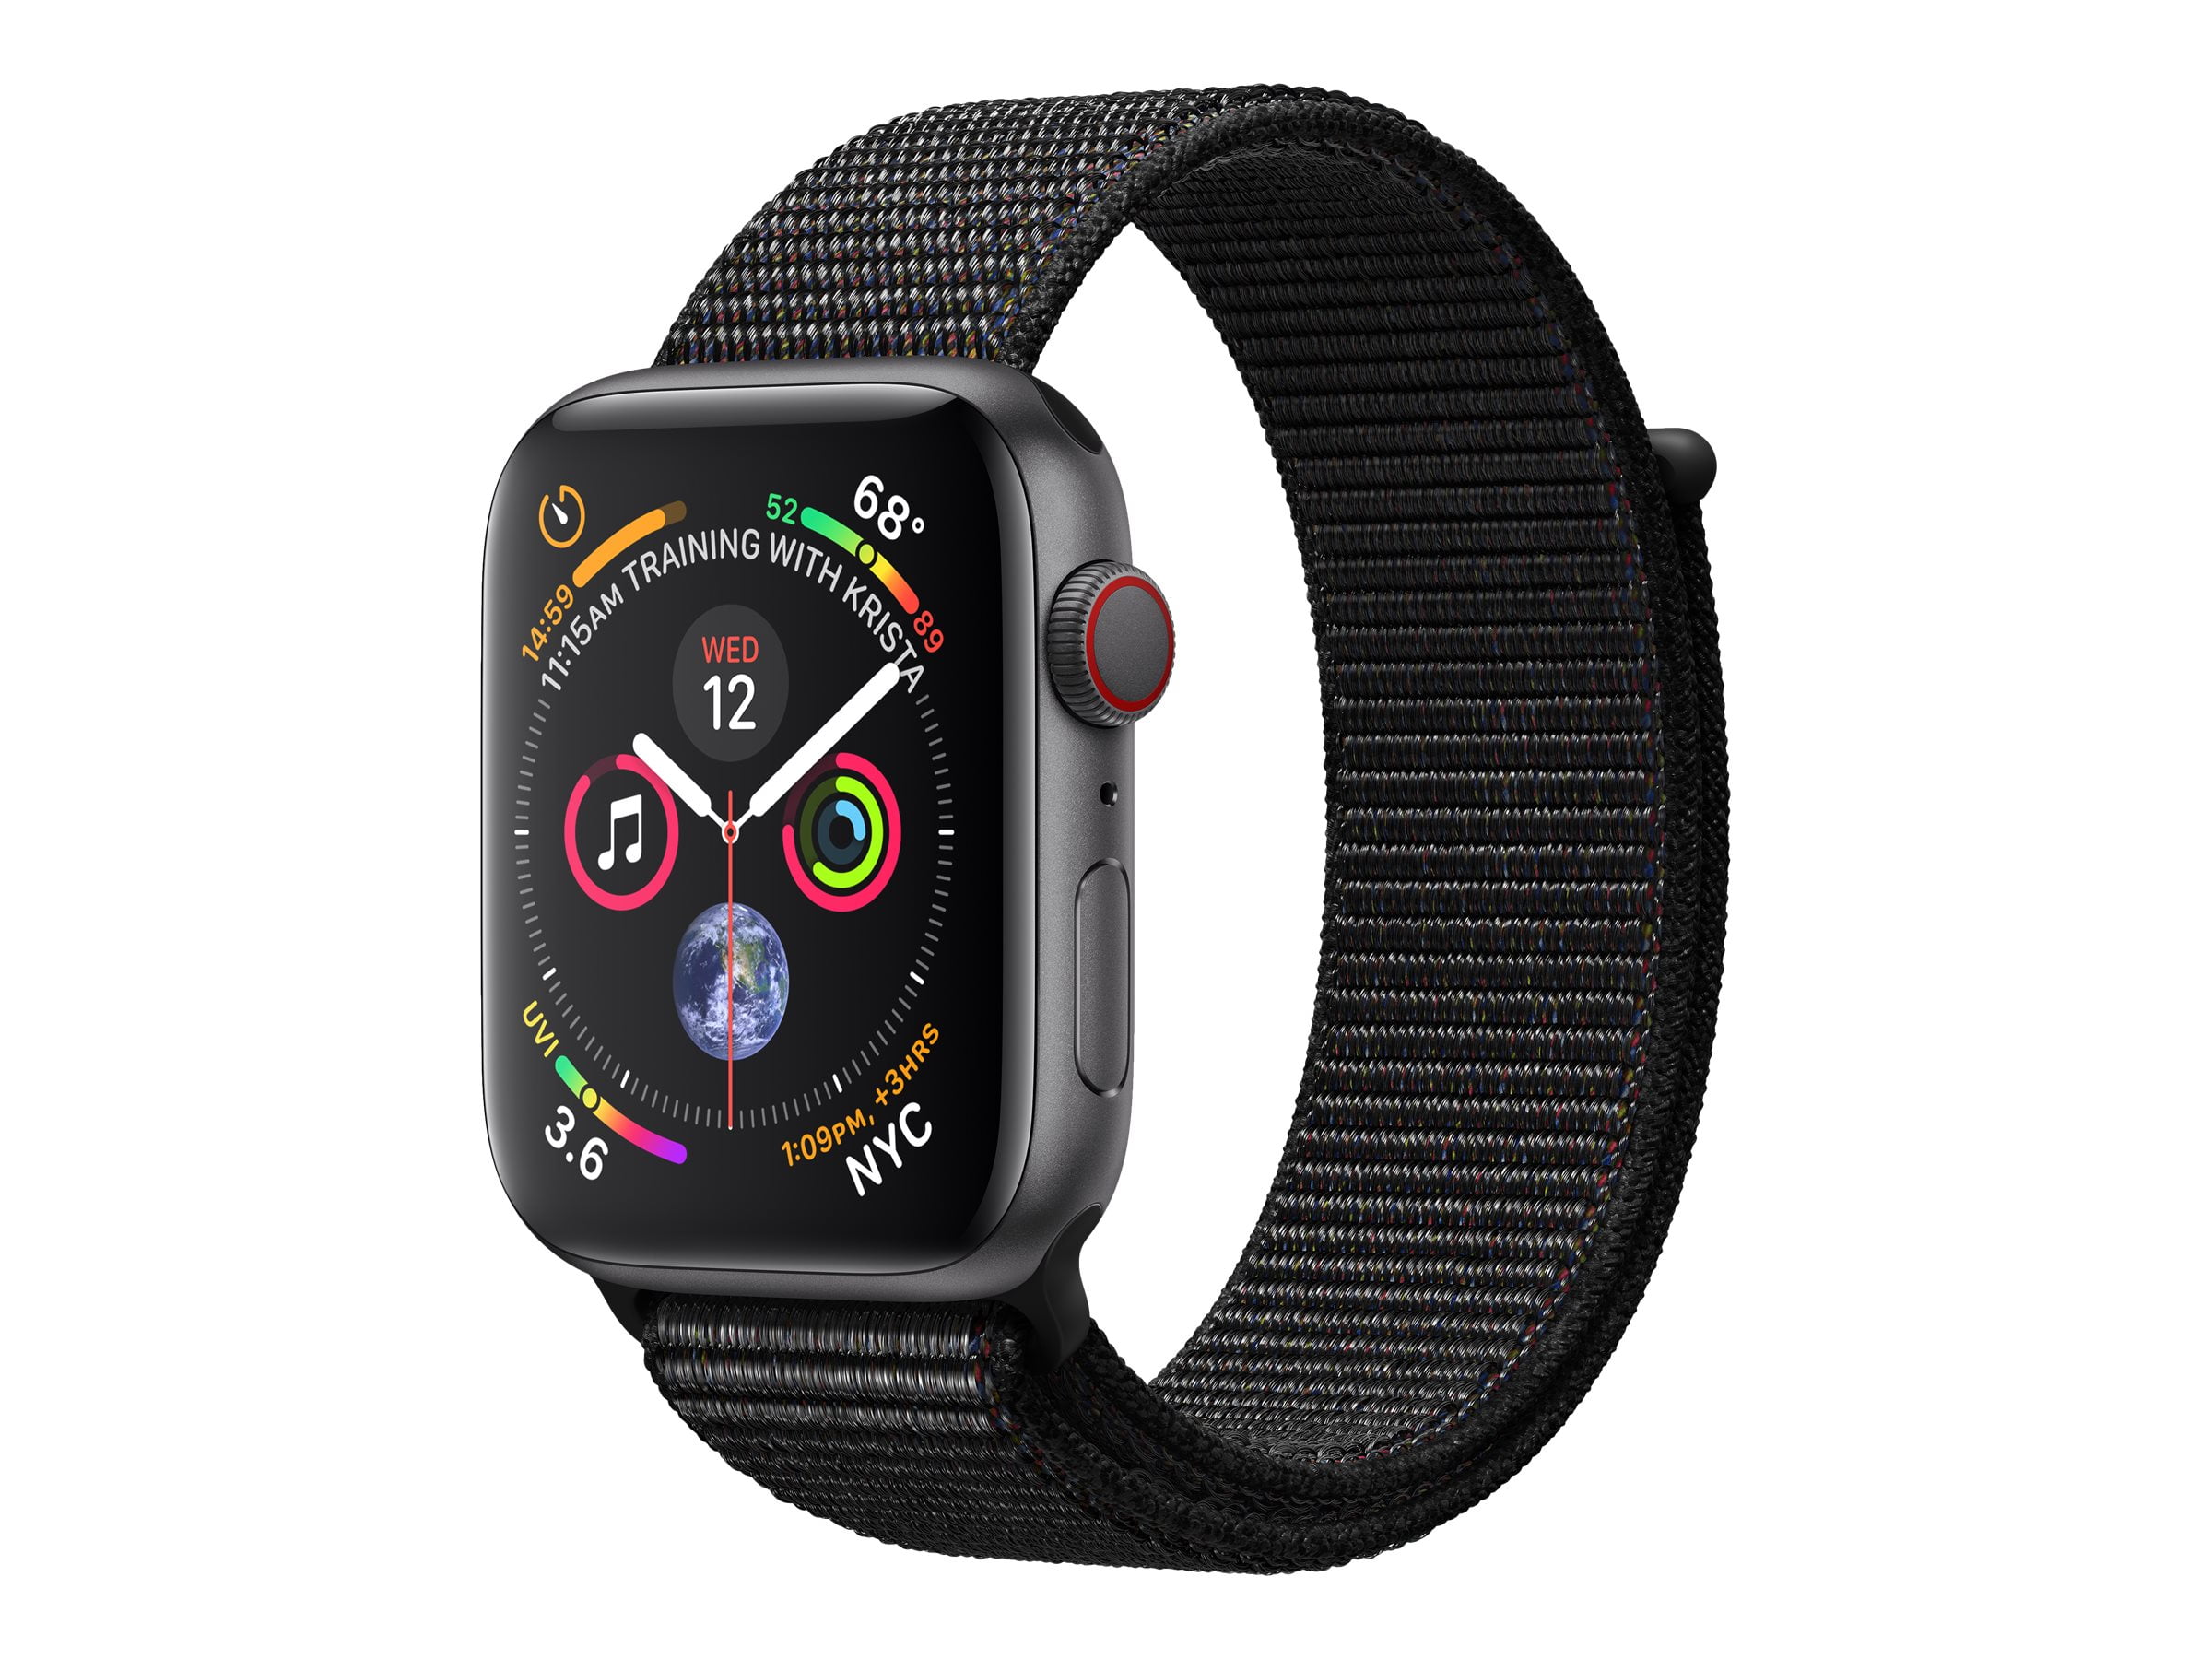 Apple Watch Series 4 (GPS + Cellular) - 44 mm - space gray aluminum - smart  watch with sport loop - woven nylon - black - wrist size: 5.71 in - 8.66 